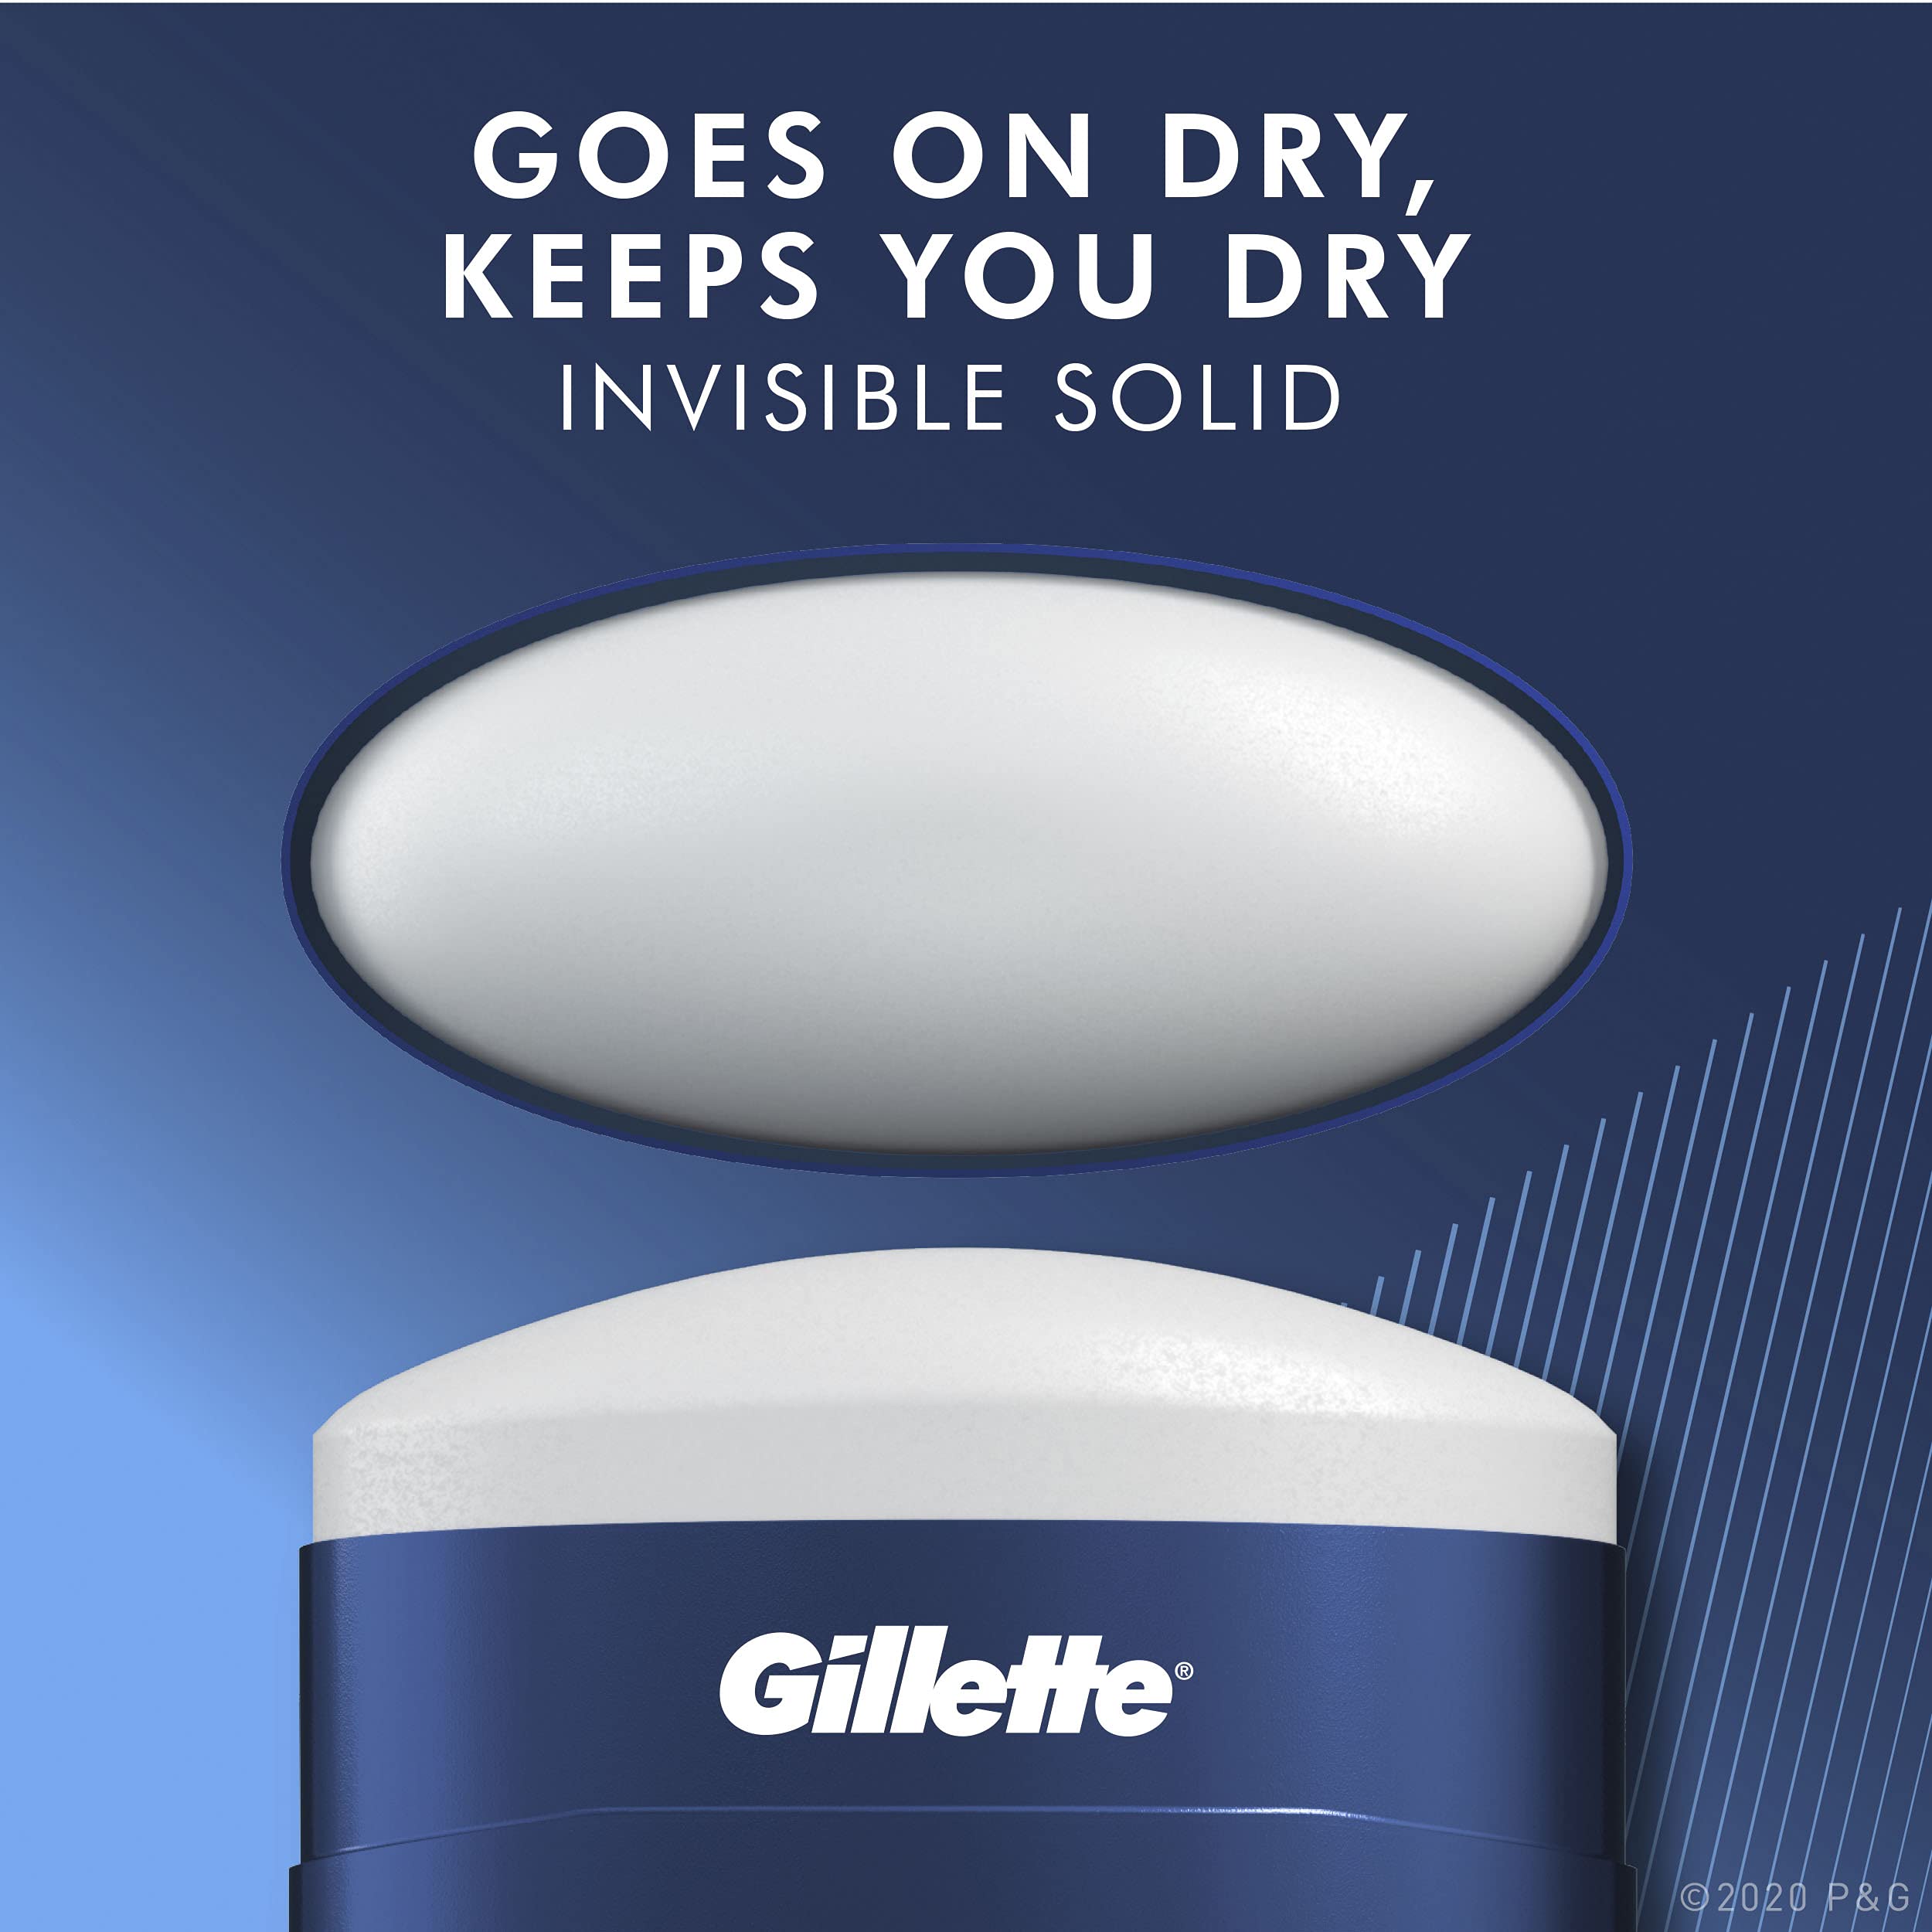 Gillette Antiperspirant Deodorant for Men, Invisible Solid, Cool Wave, 72 Hr. Sweat Protection, 3.4 oz